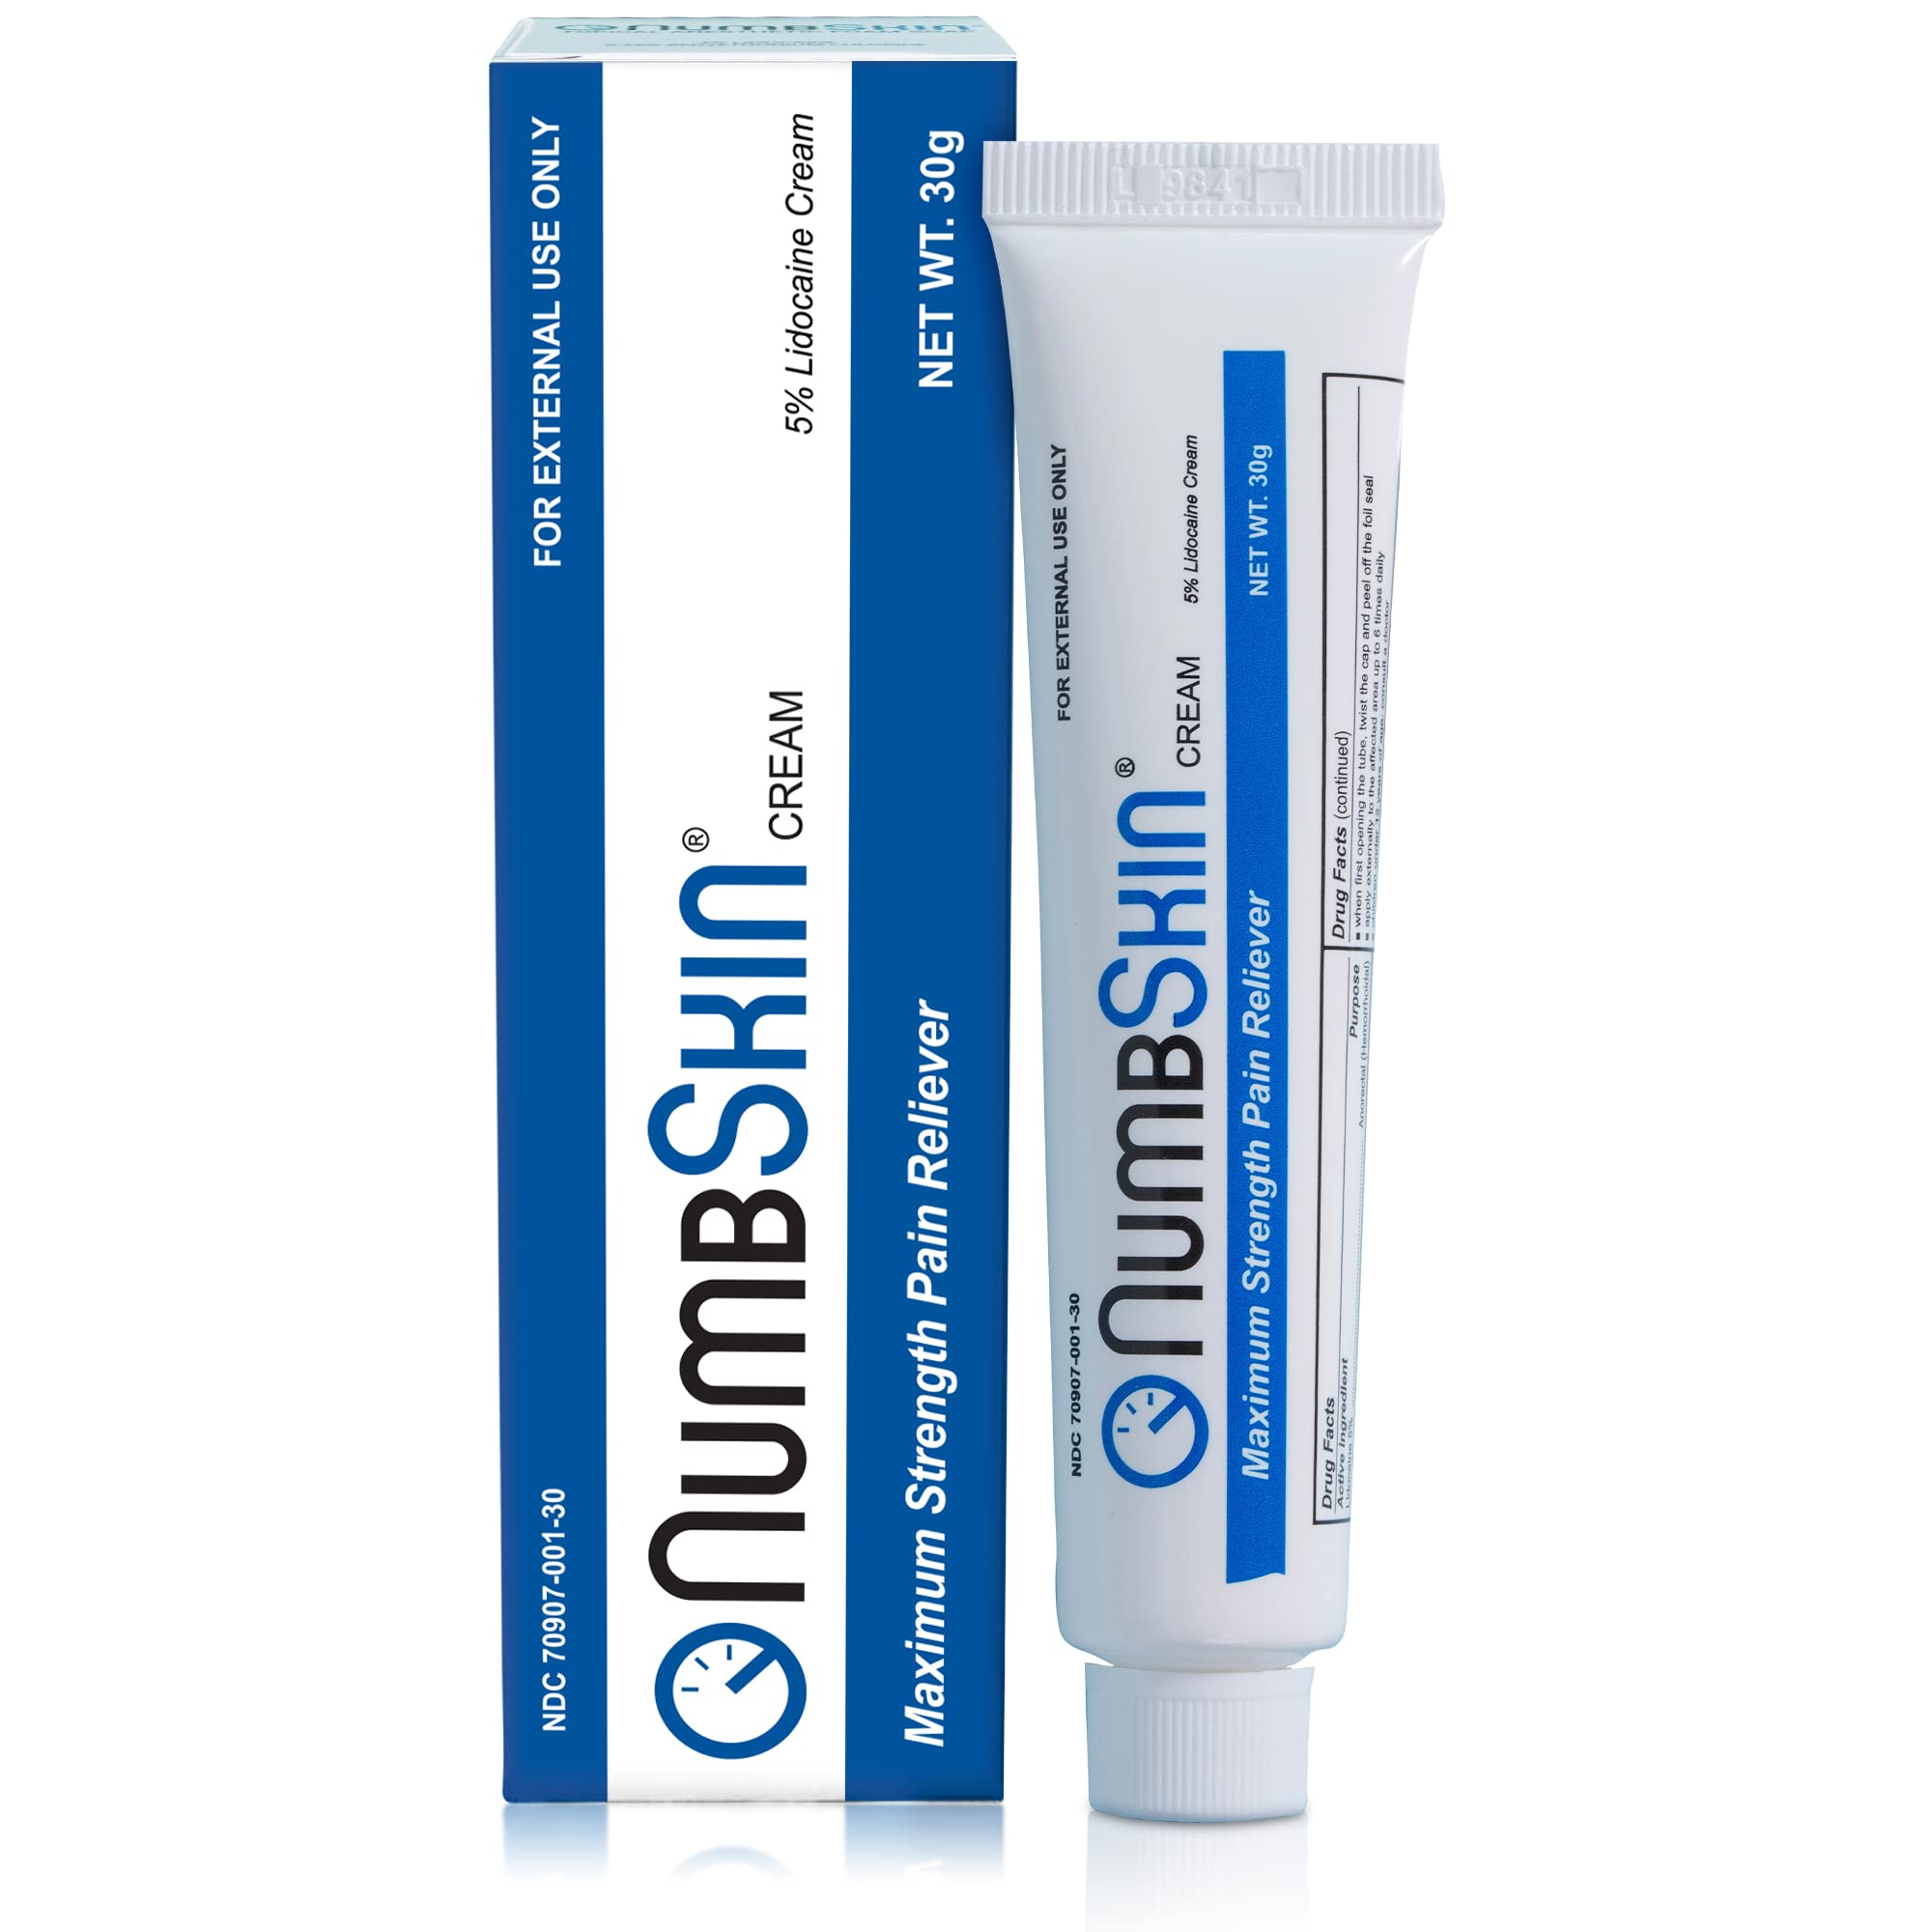 Numbskin Numbing Cream - 5% Lidocaine Topical Anesthetic Cream, Maximum  Strength Pain Relieving Cream, Fastest Acting Tattoo Numbing Cream with  Vitamine E (1 Tube) 1 Ounce (Pack of 1)